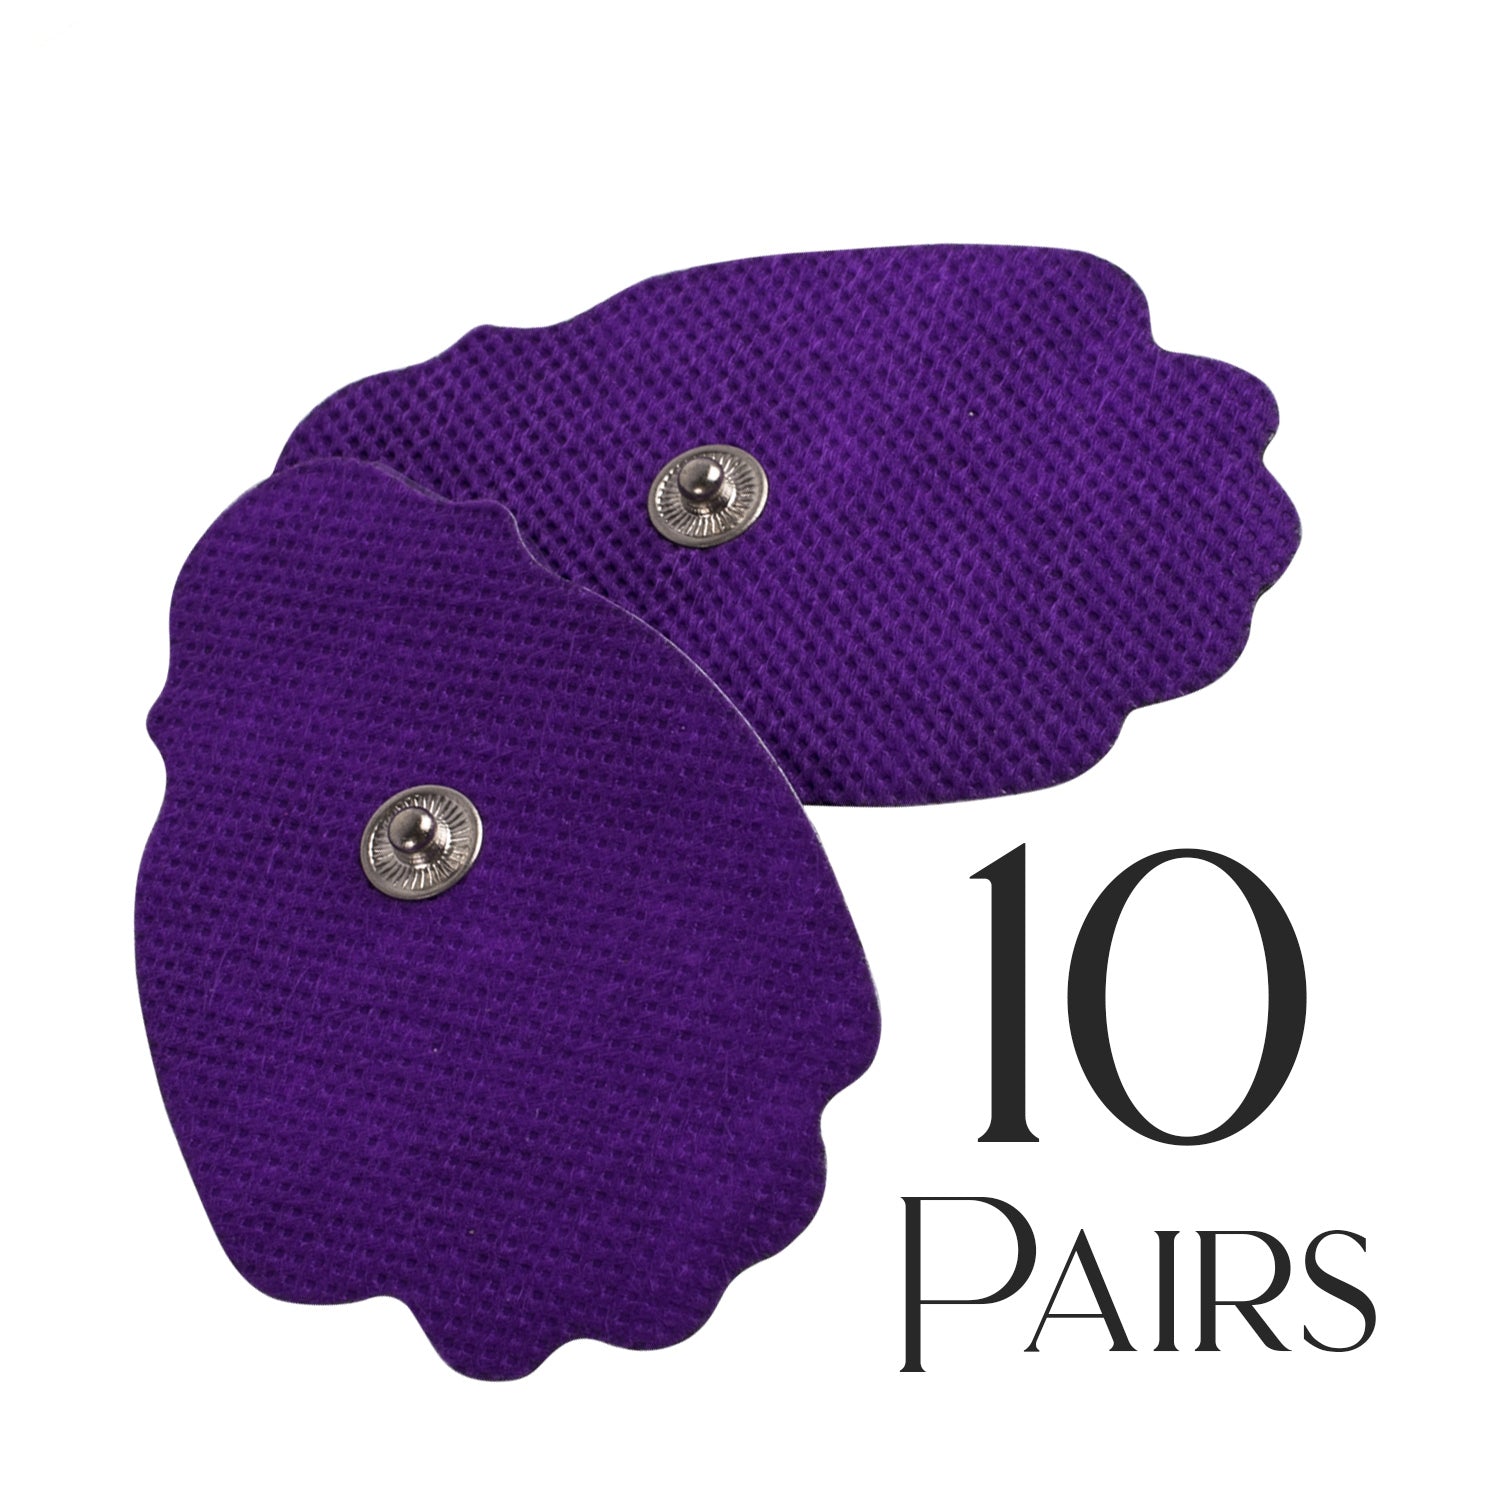 Pads for TENS Unit 2x4 Large 12 Total FDA Electrode Pads EMPI